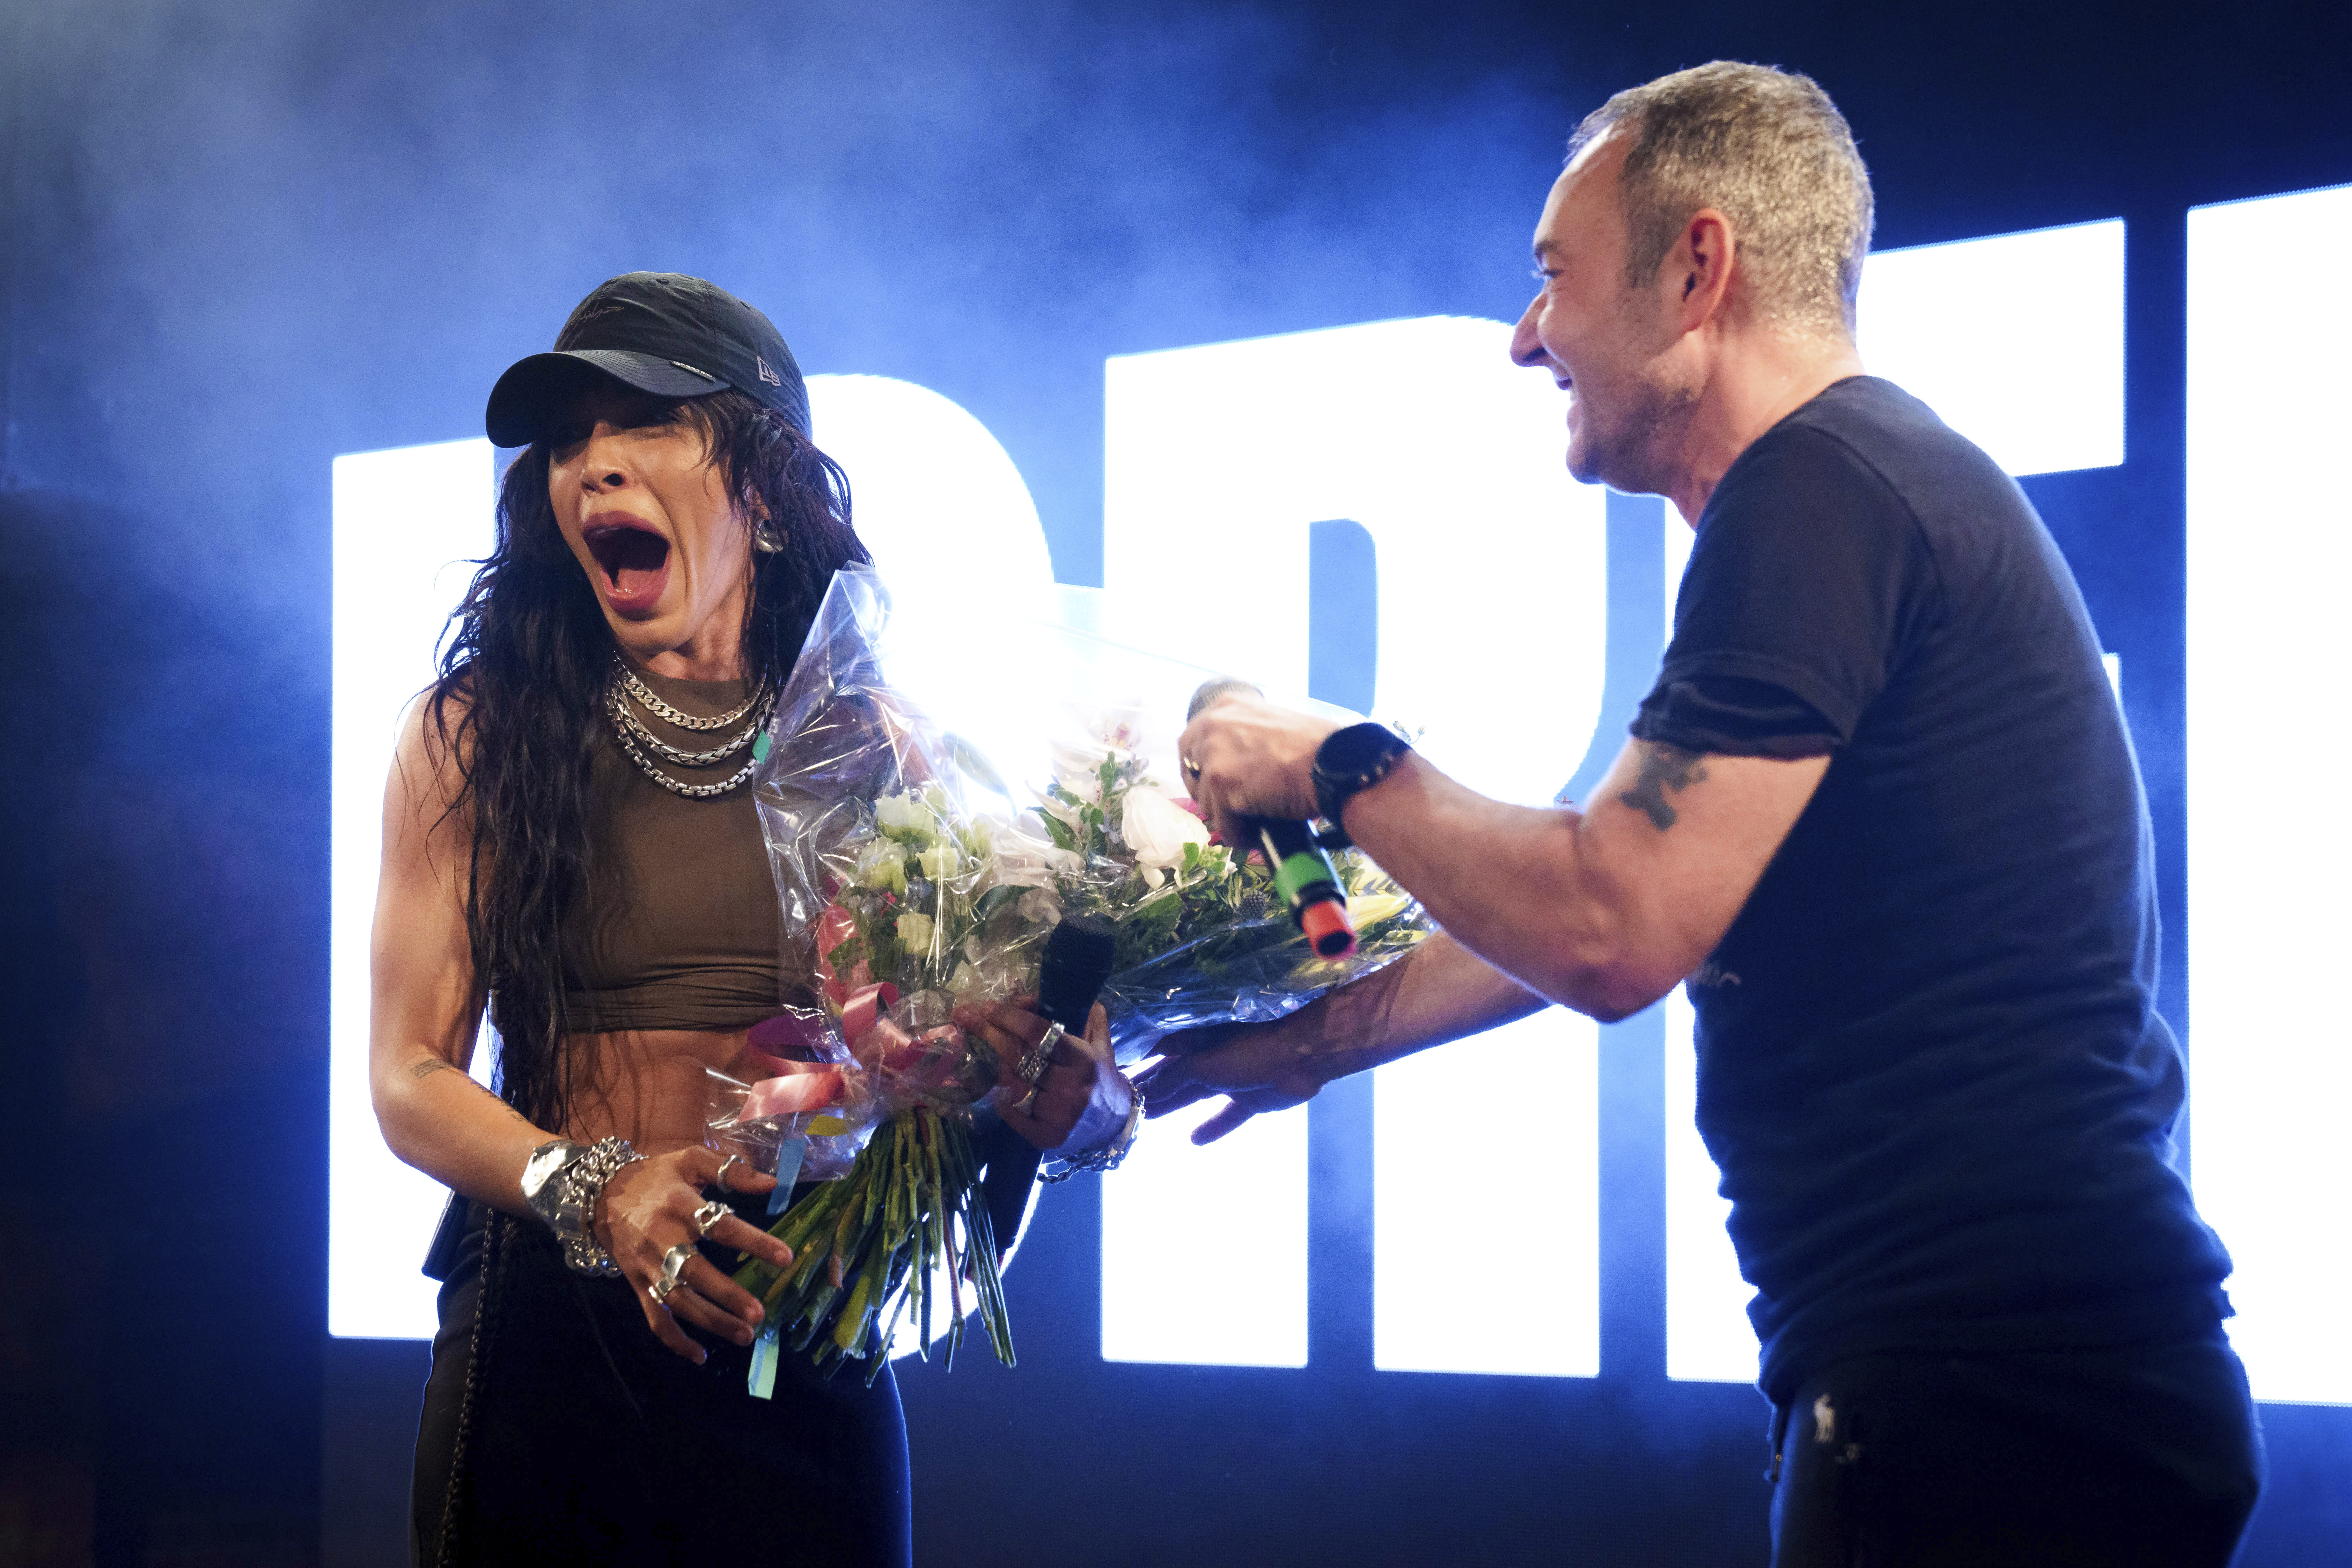 Loreen, left, receives a bouquet of roses from Jeremy Joseph onstage at Heaven Nightclub in London on Tuesday, April 18, 2023. (Scott Garfitt/Invision/AP)